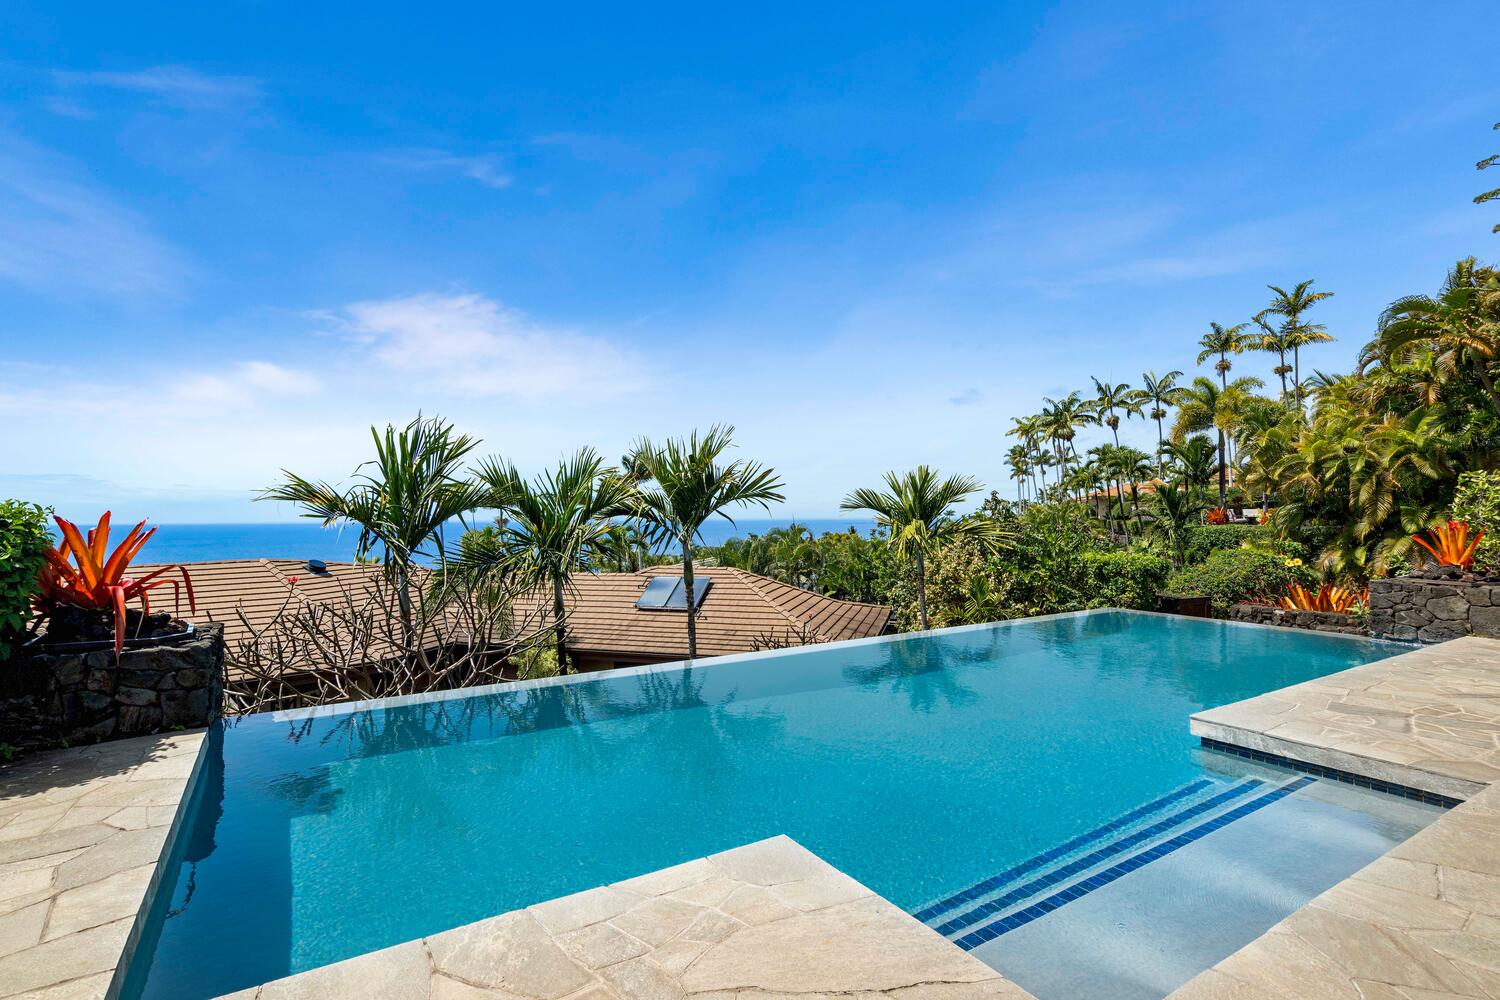 Kailua Kona Vacation Rentals, Blue Hawaii - Breath taking views of the cost from the Infinity Edge Pool!